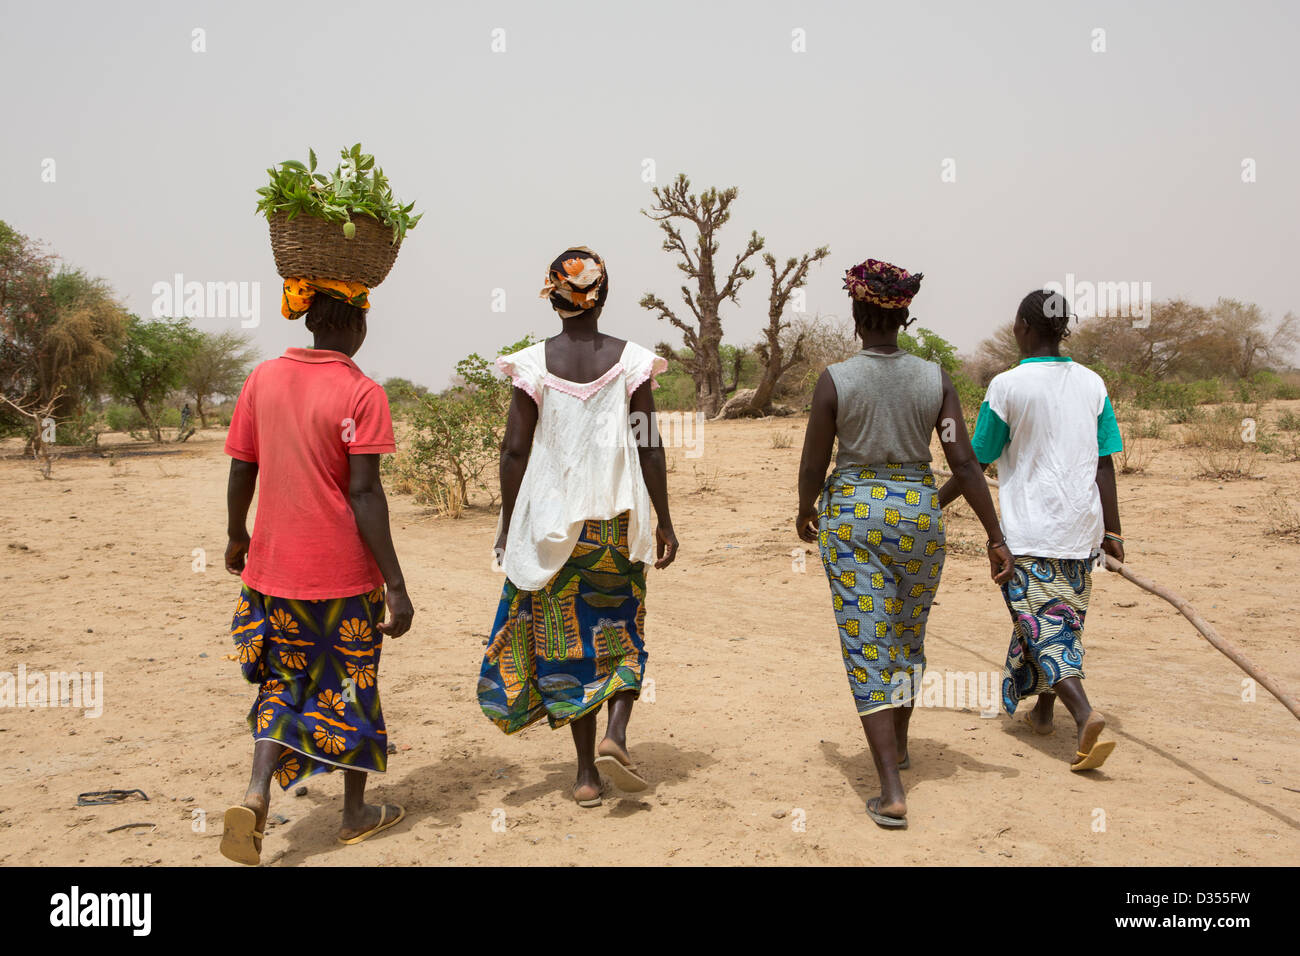 Barsalogho, Burkina Faso, May 2012: Village women collect baobab leaves in  to suppliment their diet in the dry season. Stock Photo